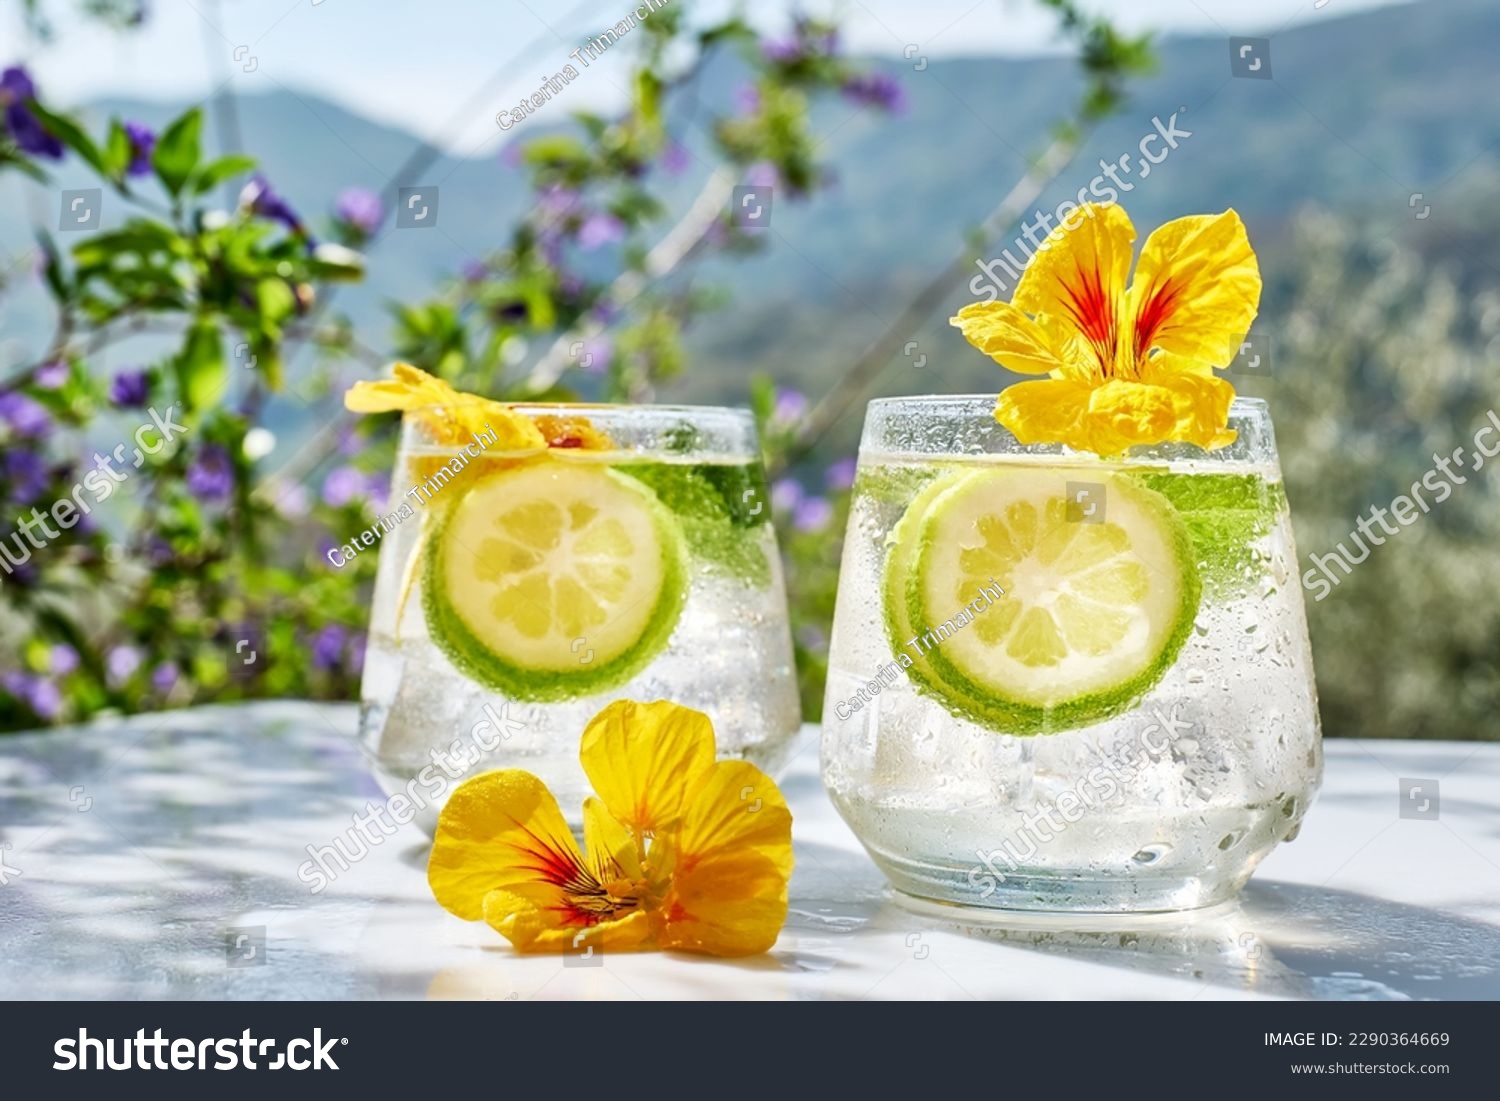 Iced lemonade with edible nasturtium flowers, lime and mint leaves. Refreshing summer drink. Healthy organic summer soda drink. Detox water. Diet unalcolic coctail. #2290364669